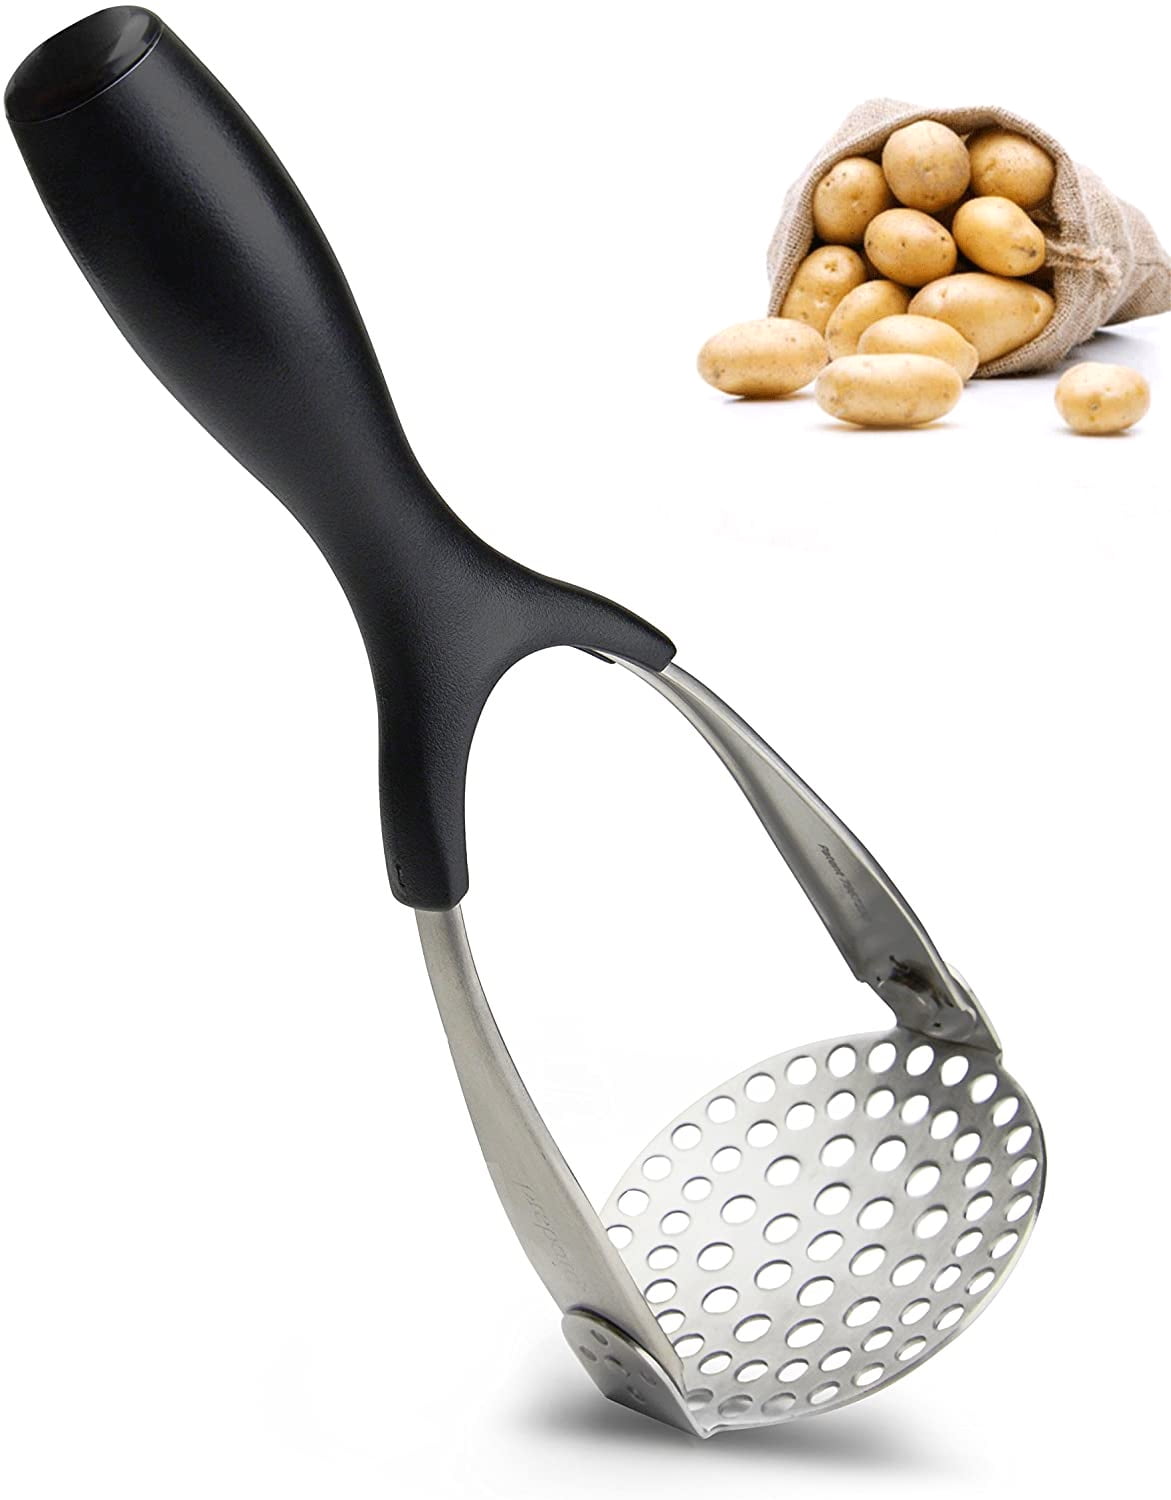 Kitchen Heavy-Duty Manual Masher Tool Stainless Steel Triangular Potato Rice Strong and Agile